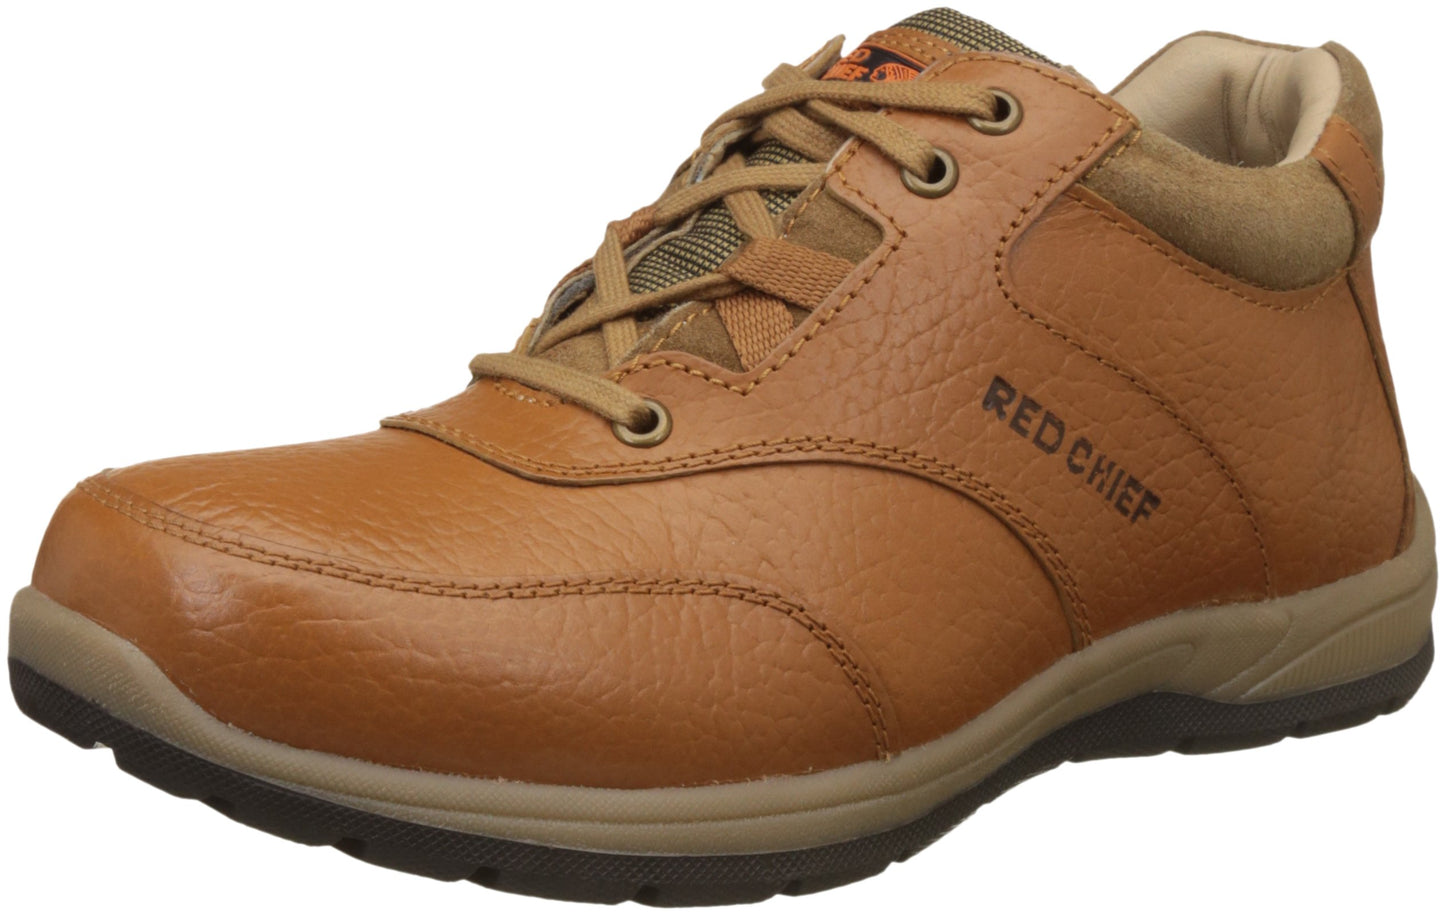 Red Chief Casual Shoes for Men Tan